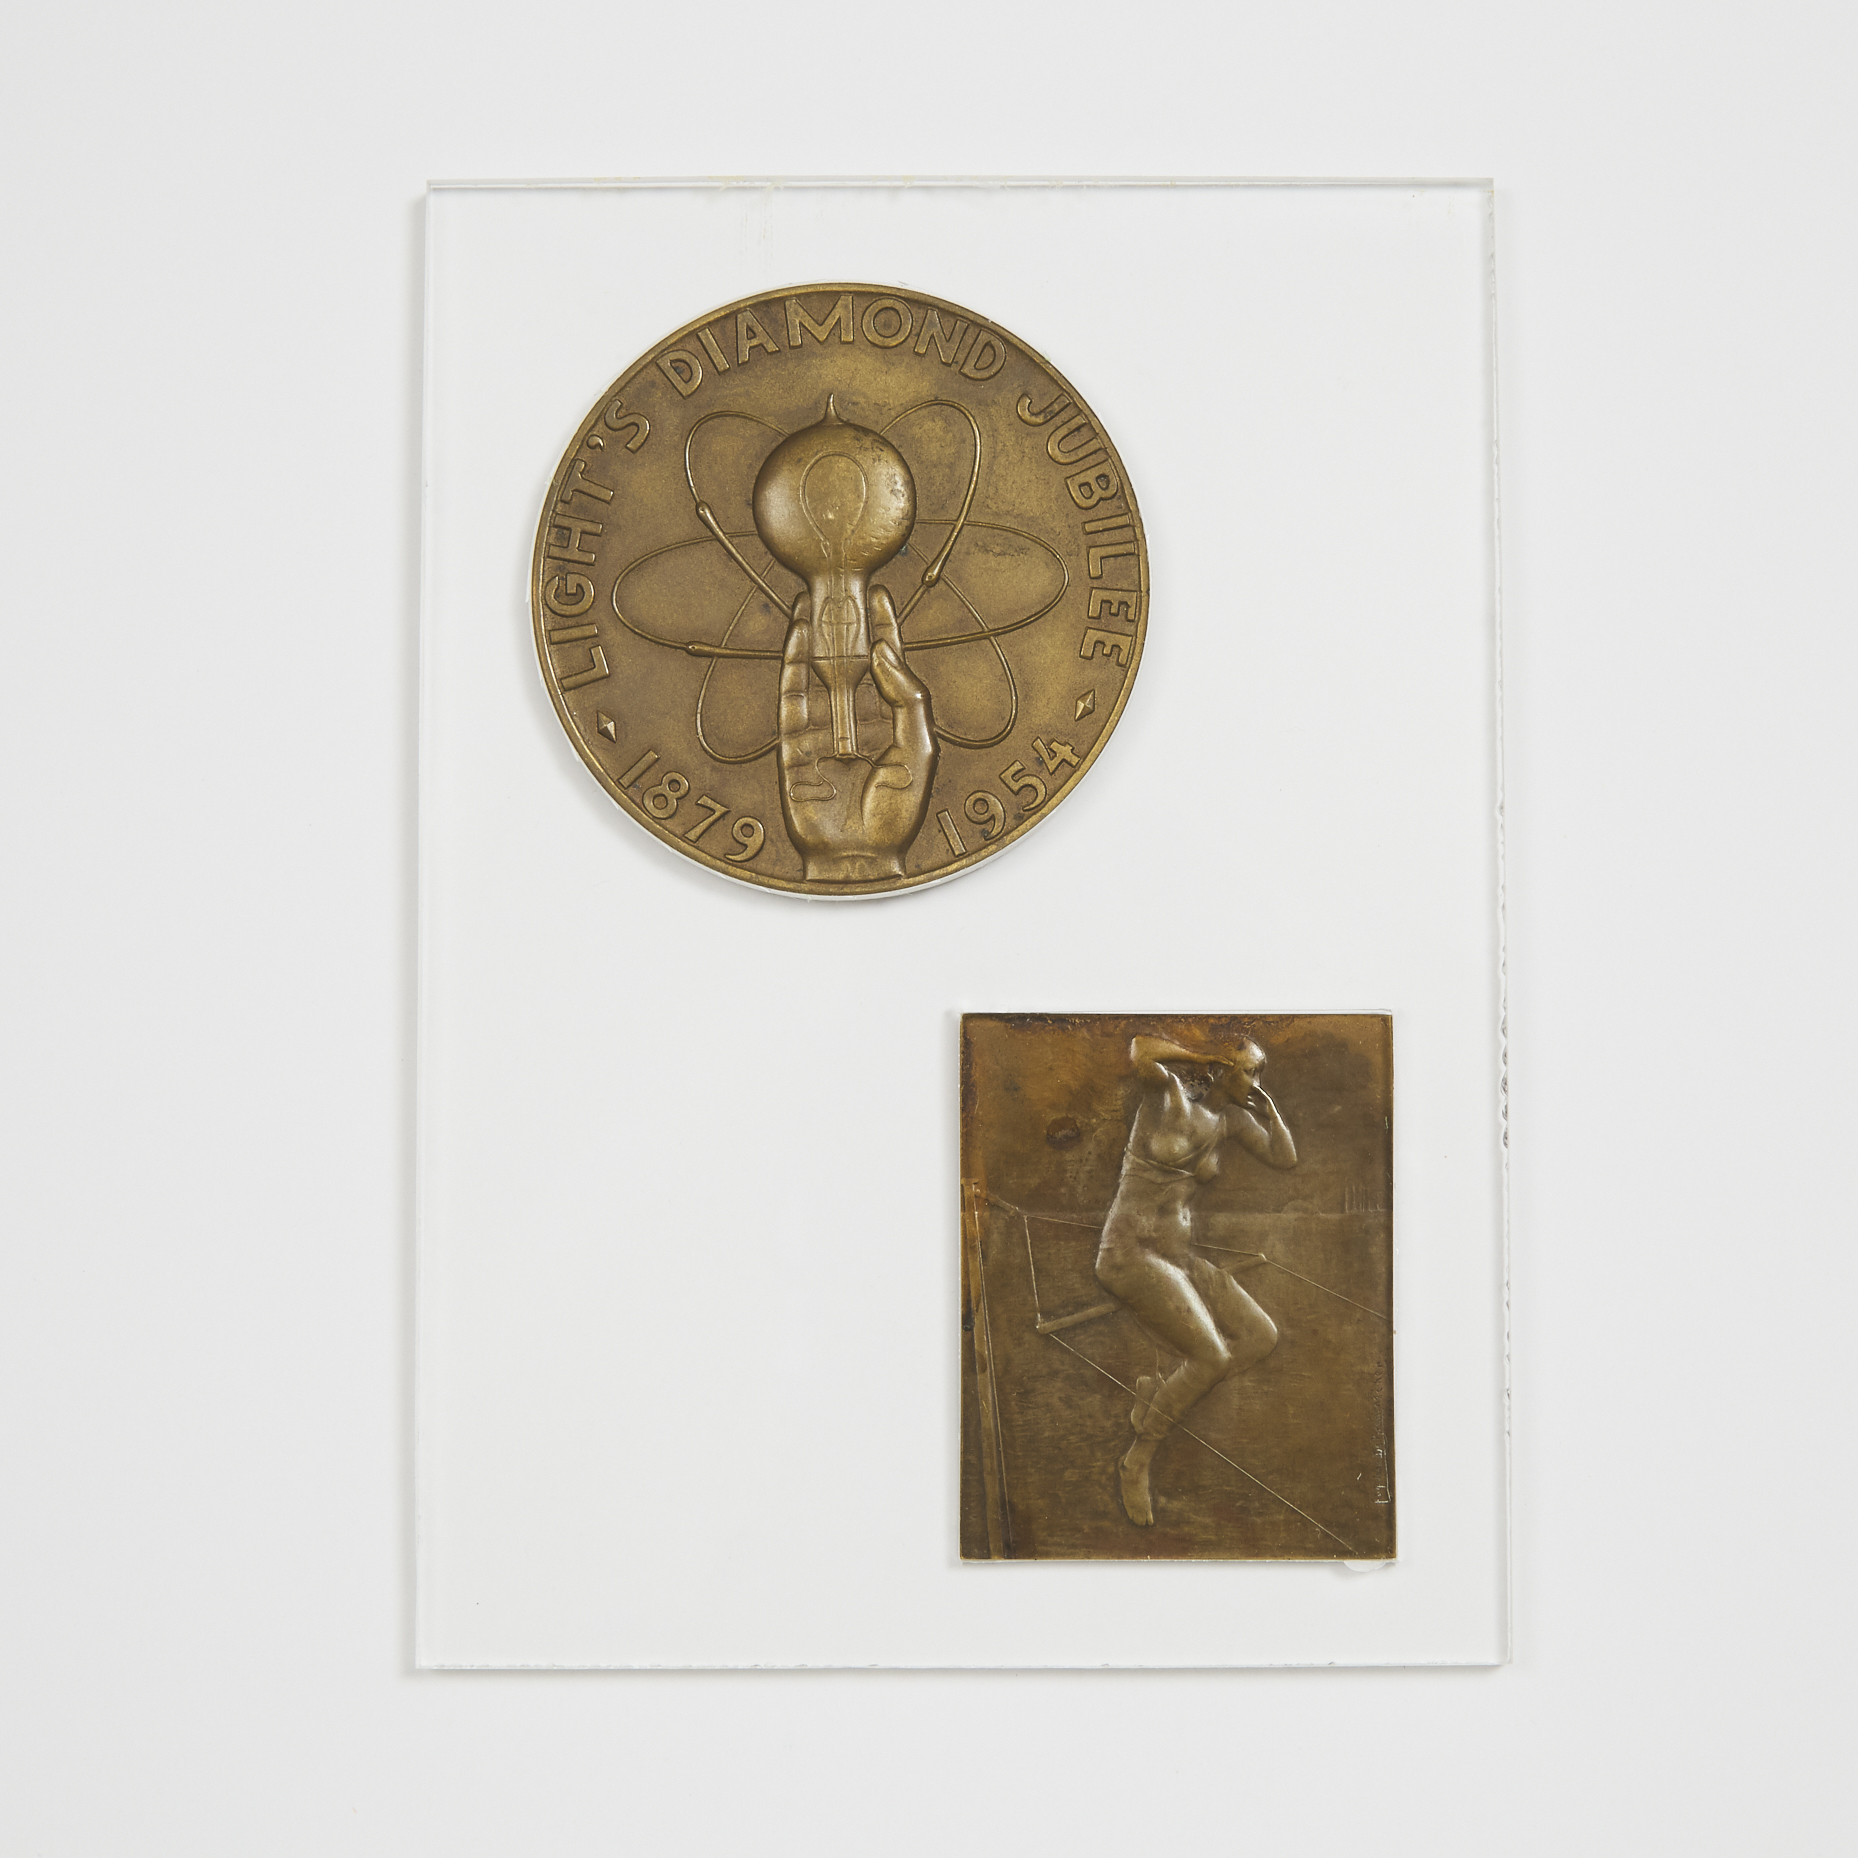 Two Bronze Medals Commemorating Technological Achievements, 20th century